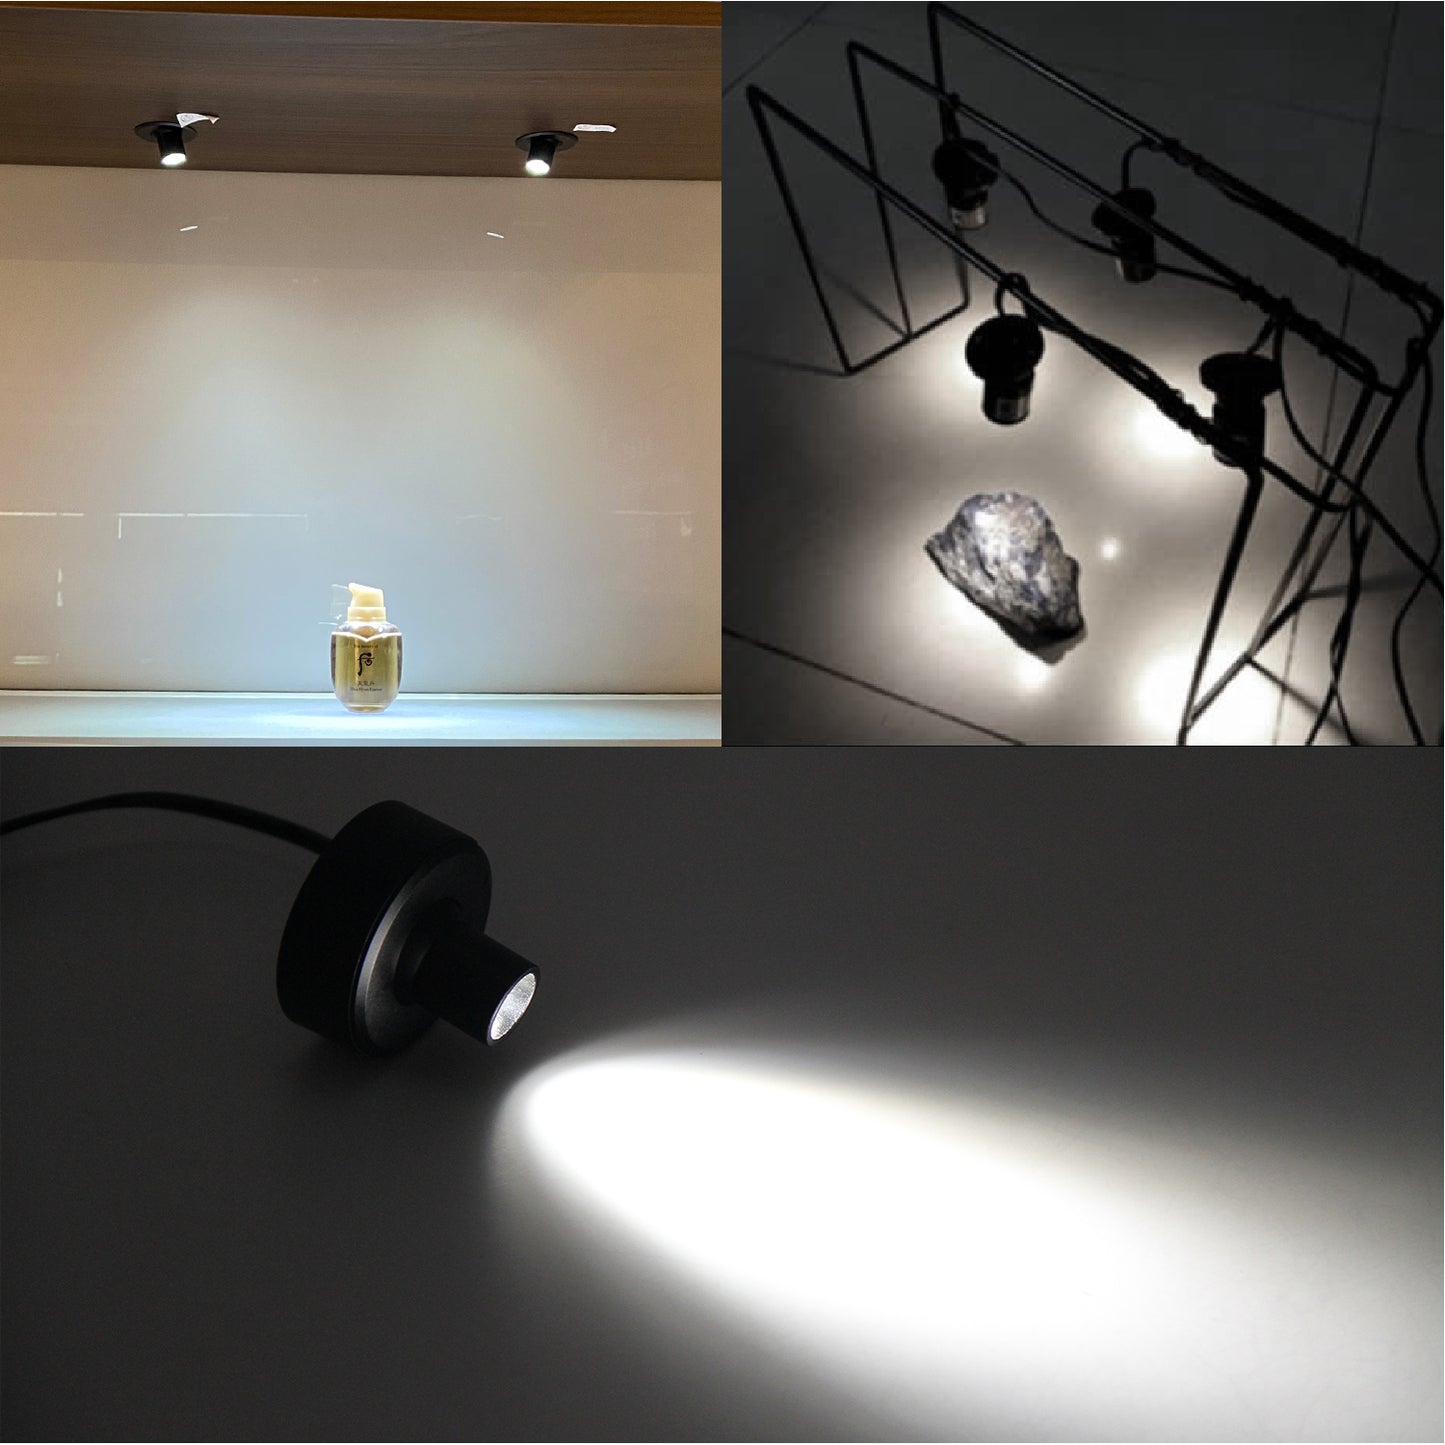 Send inquiry for 12V Black Mini Spotlight Indoor 1W Modern Closet Lighting to high quality Black Mini Spotlight Indoor supplier. Wholesale Closet Lighting directly from China Mini Spotlight Indoor manufacturers/exporters. Get a factory sale price list and become a distributor/agent-vstled.com